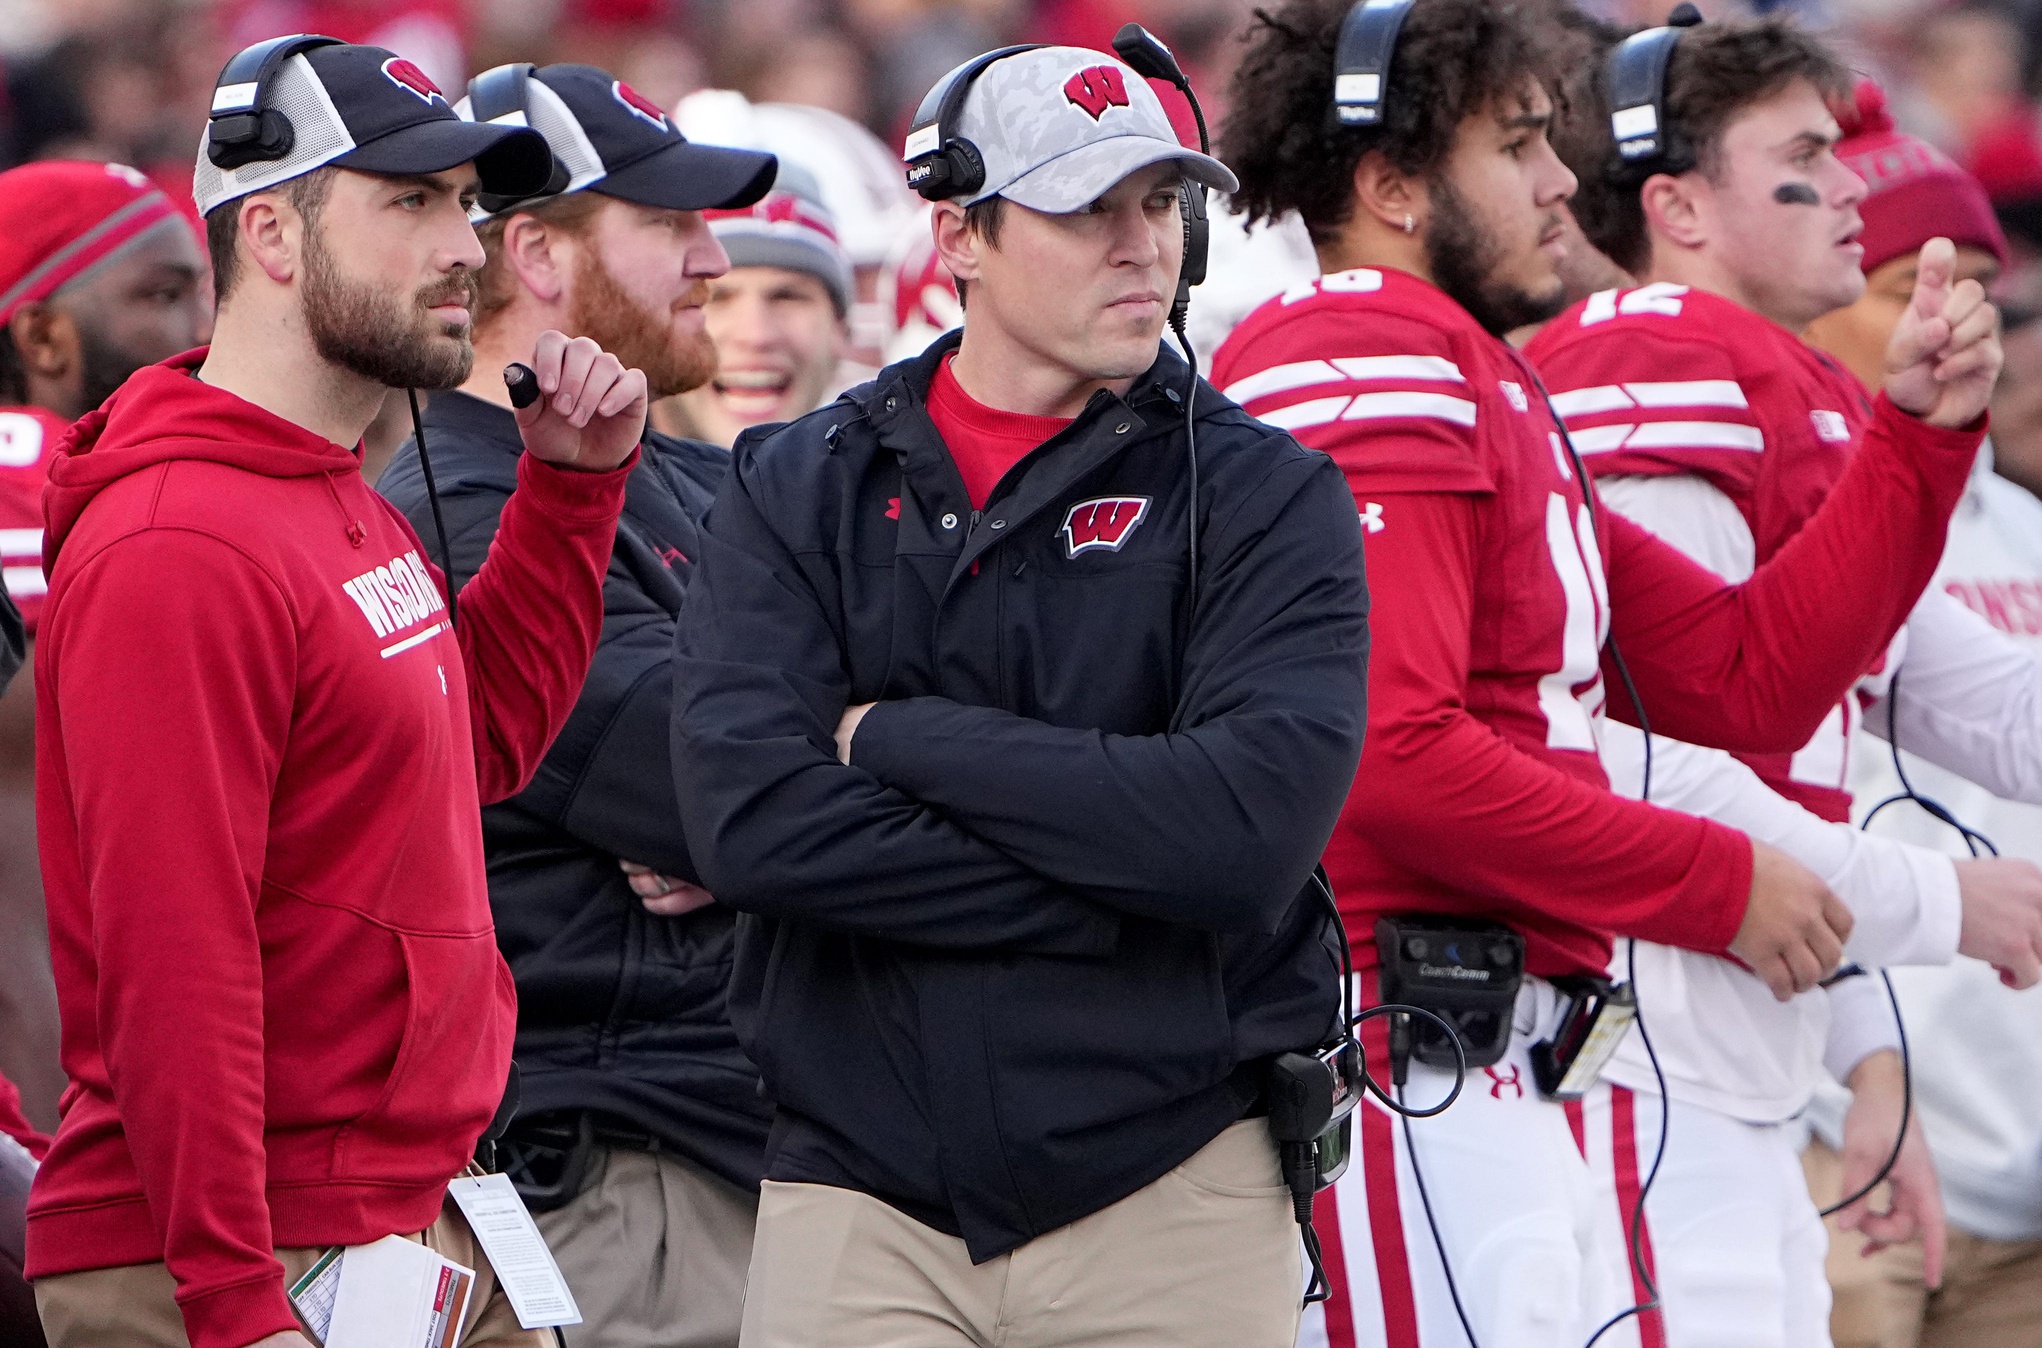 Ex-Badgers Coach Leonhard Considered for NFL Role